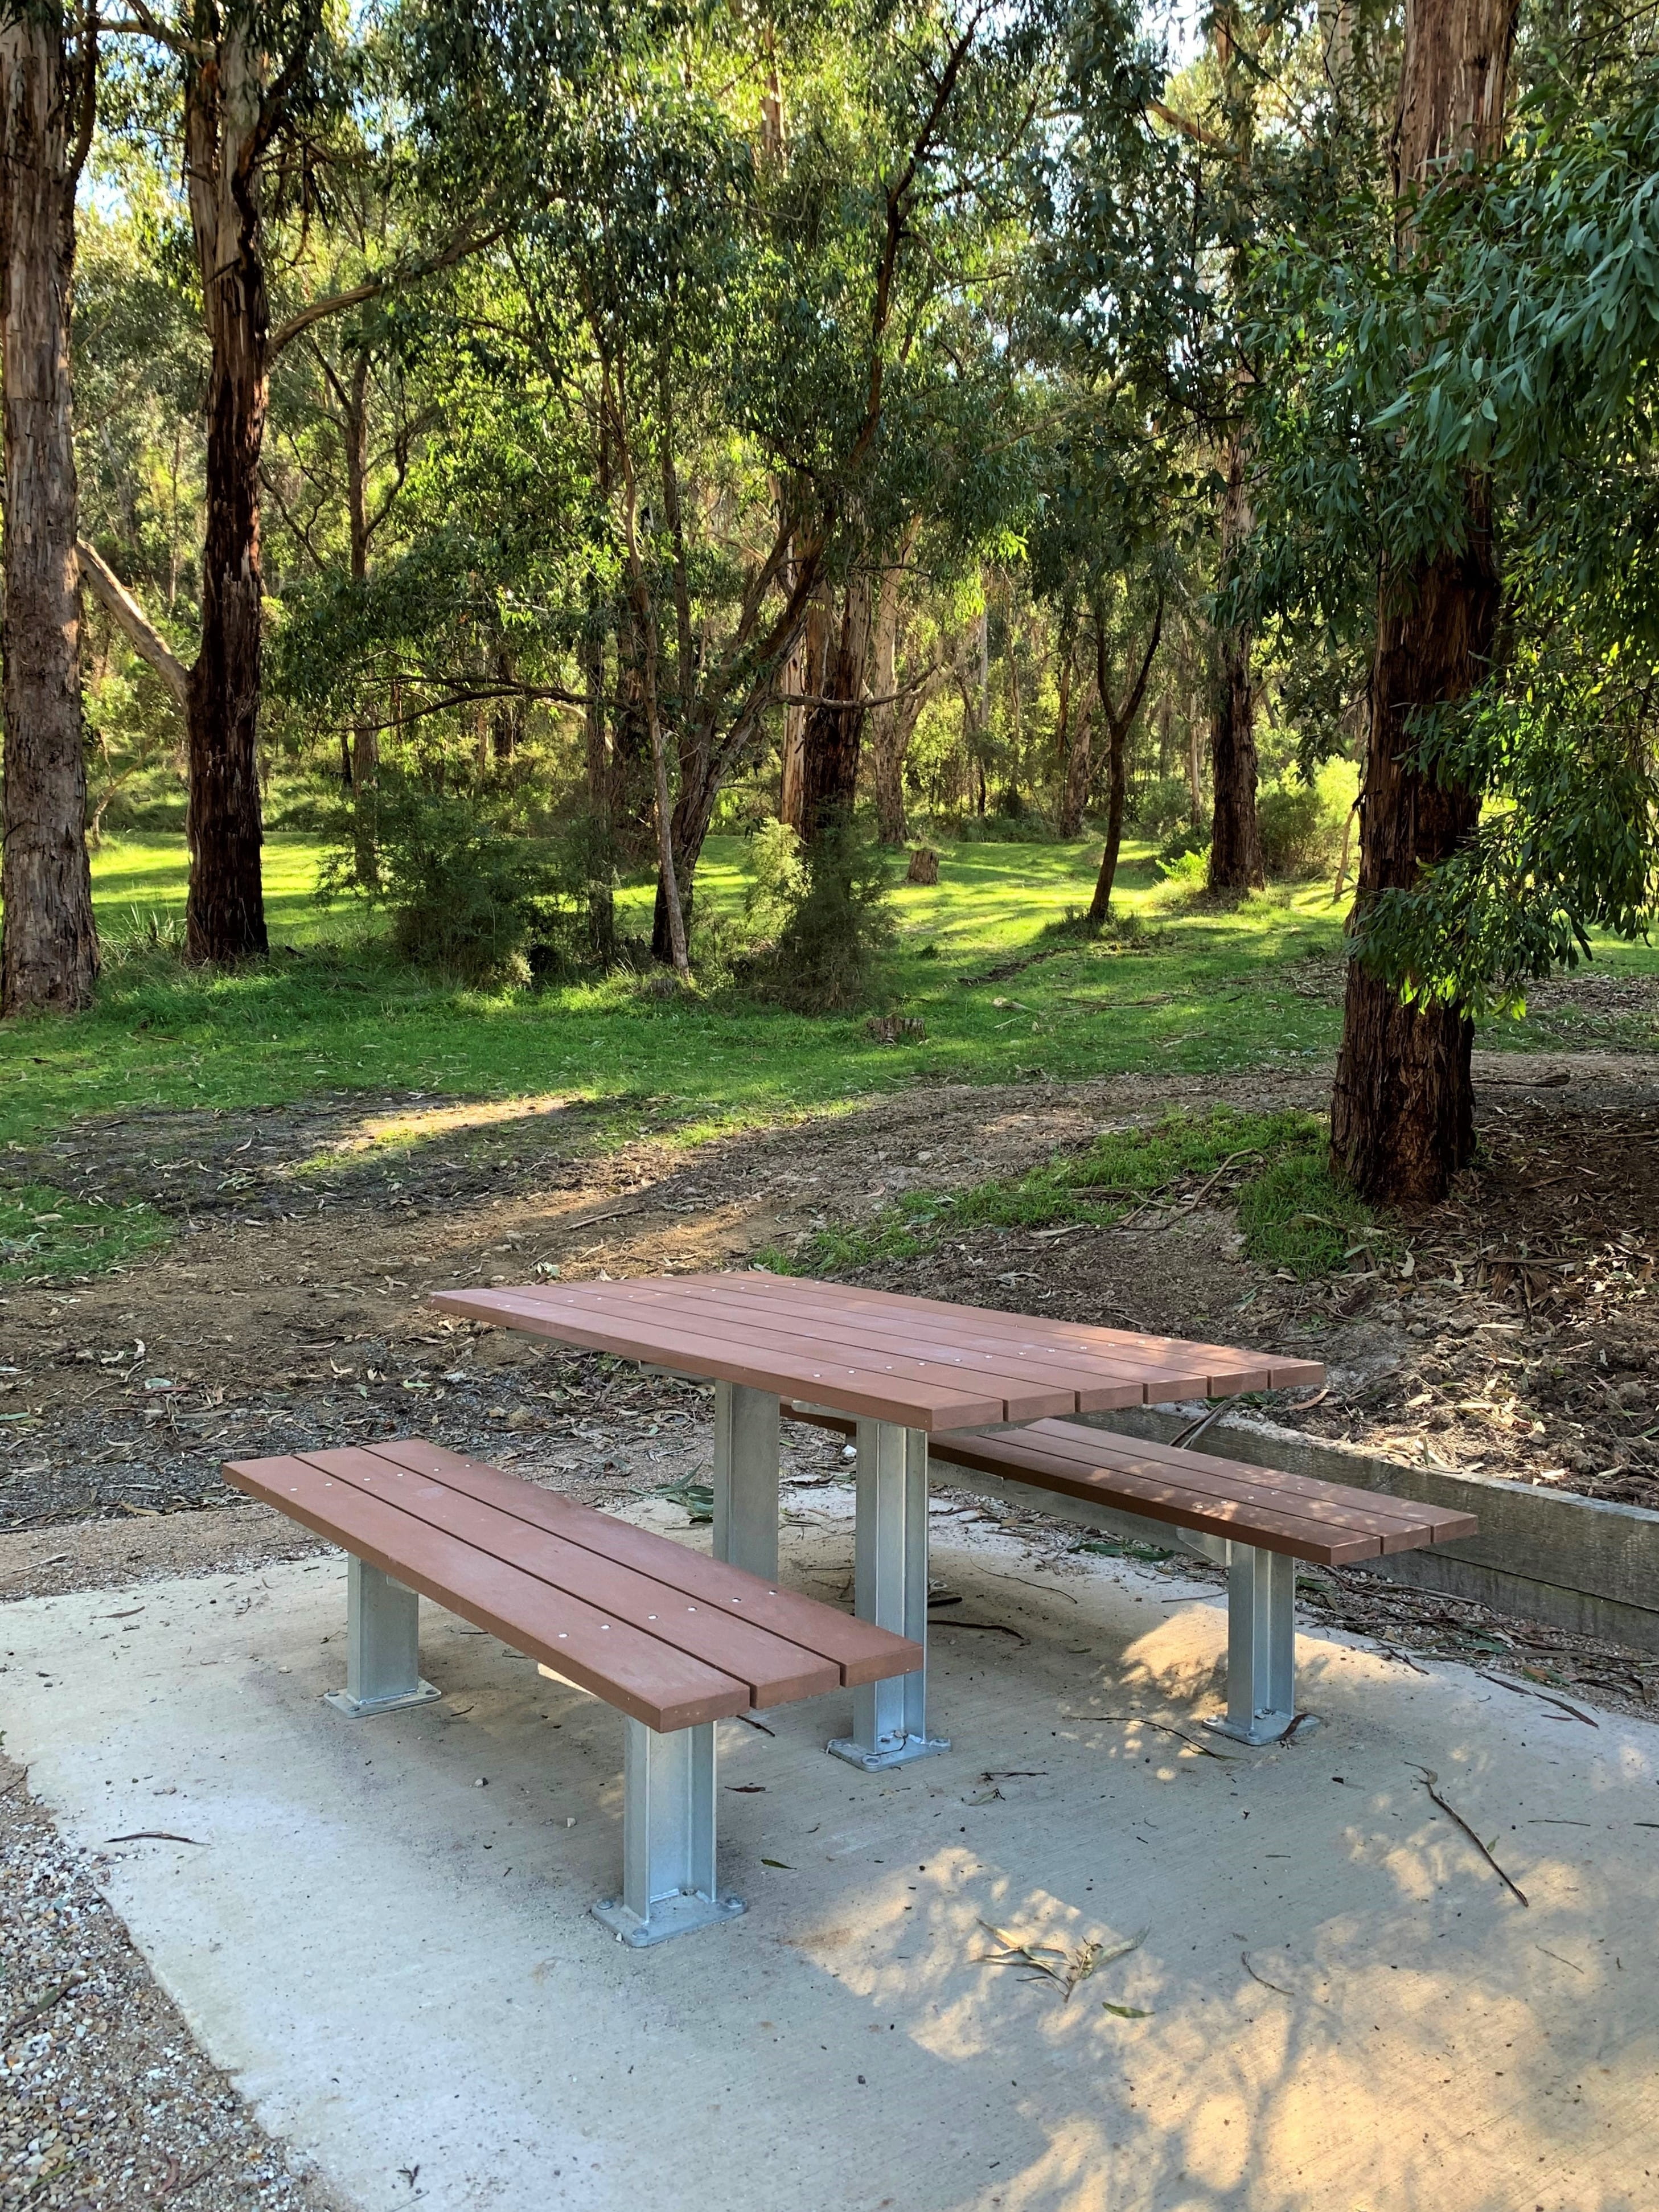 New picnic tables installed at Ferntree Gully Picnic Area, in the Dandenong Ranges National Park.